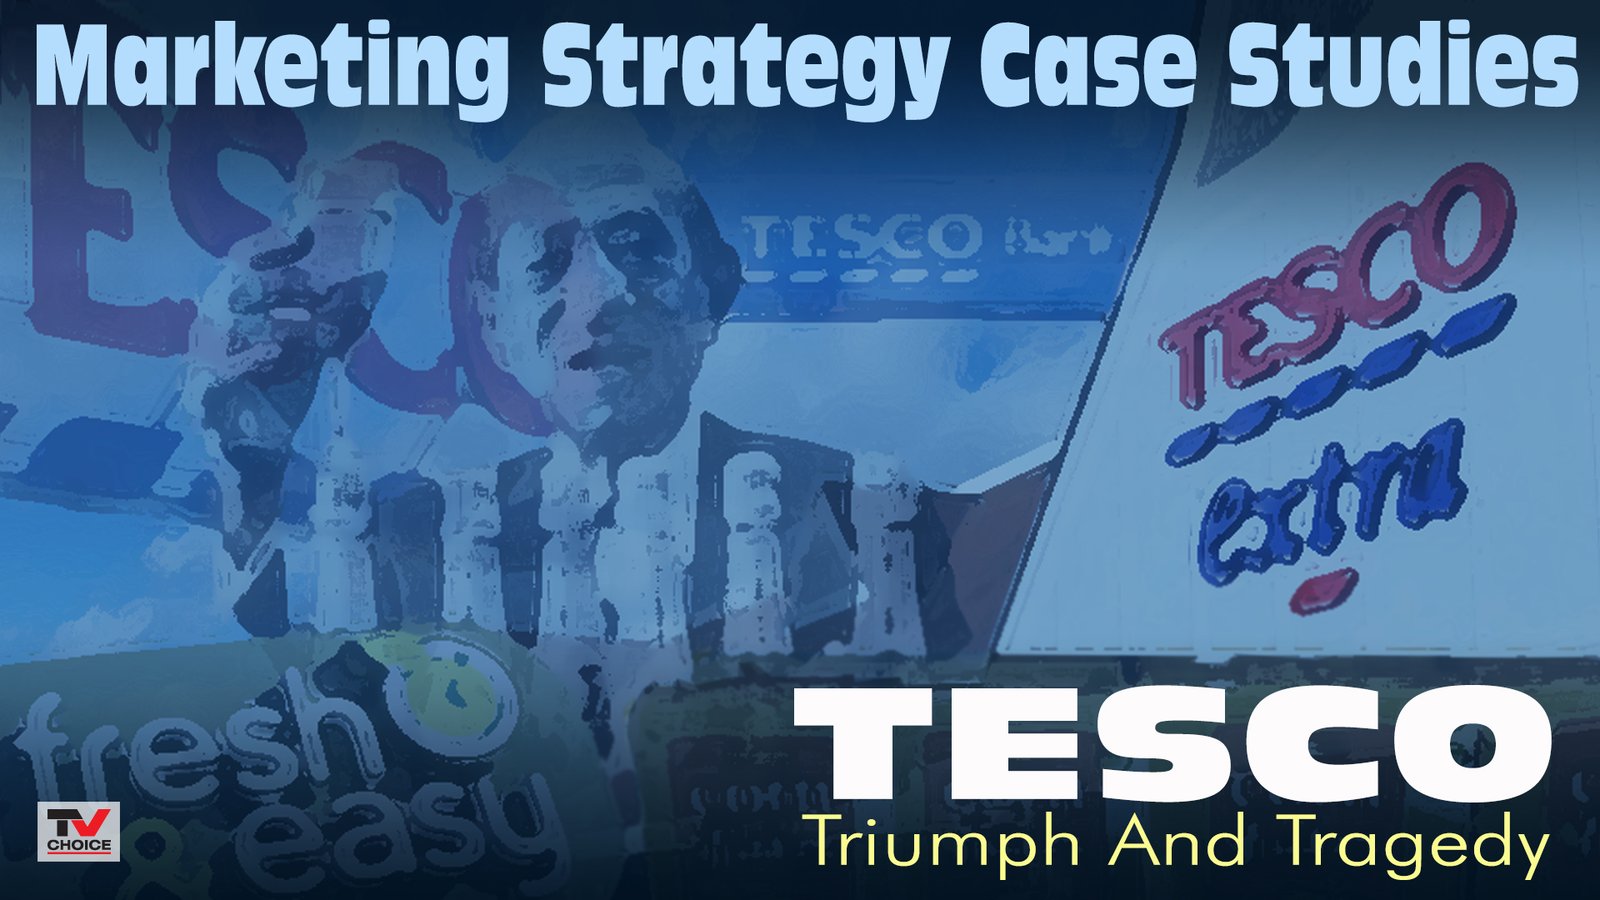 Marketing Strategy Case Studies: Tesco – Triumph and Tragedy